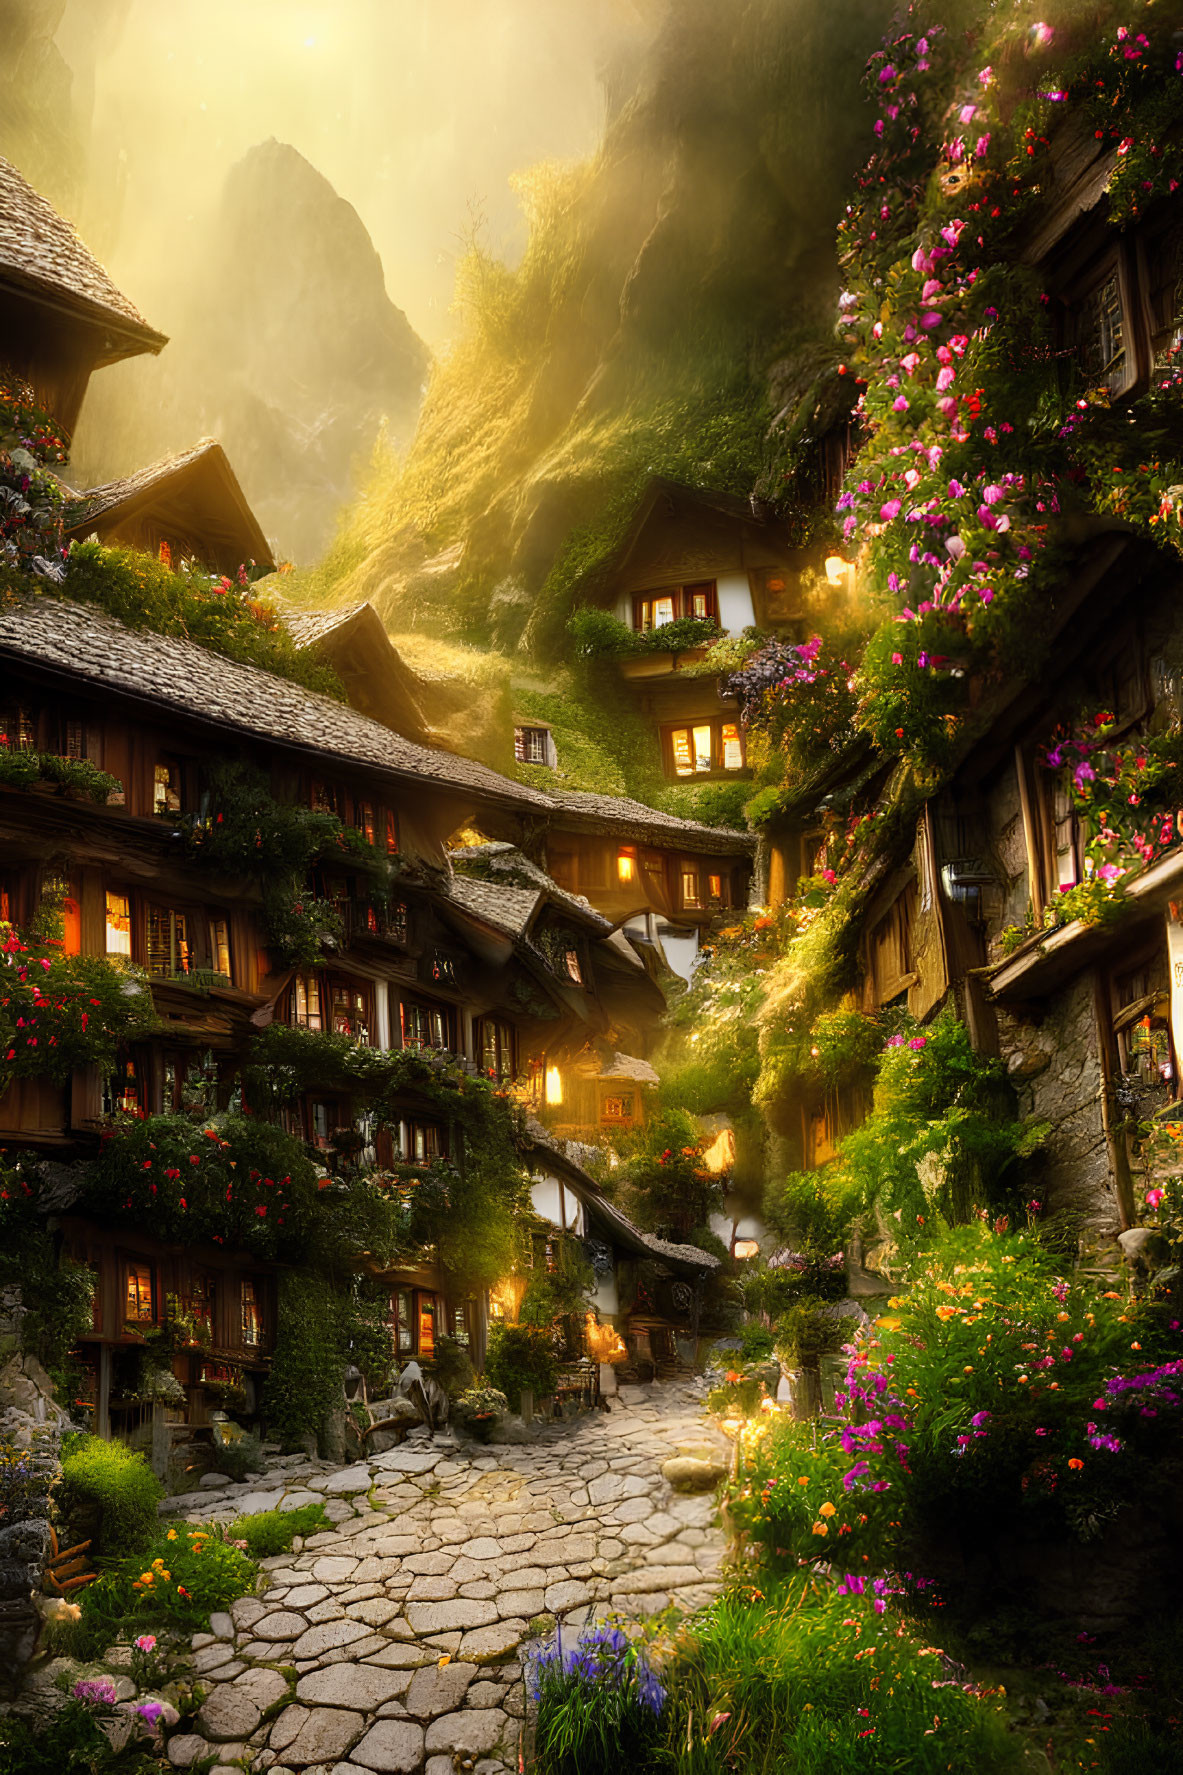 Charming mountain village with cobblestone paths and traditional houses adorned with flowers